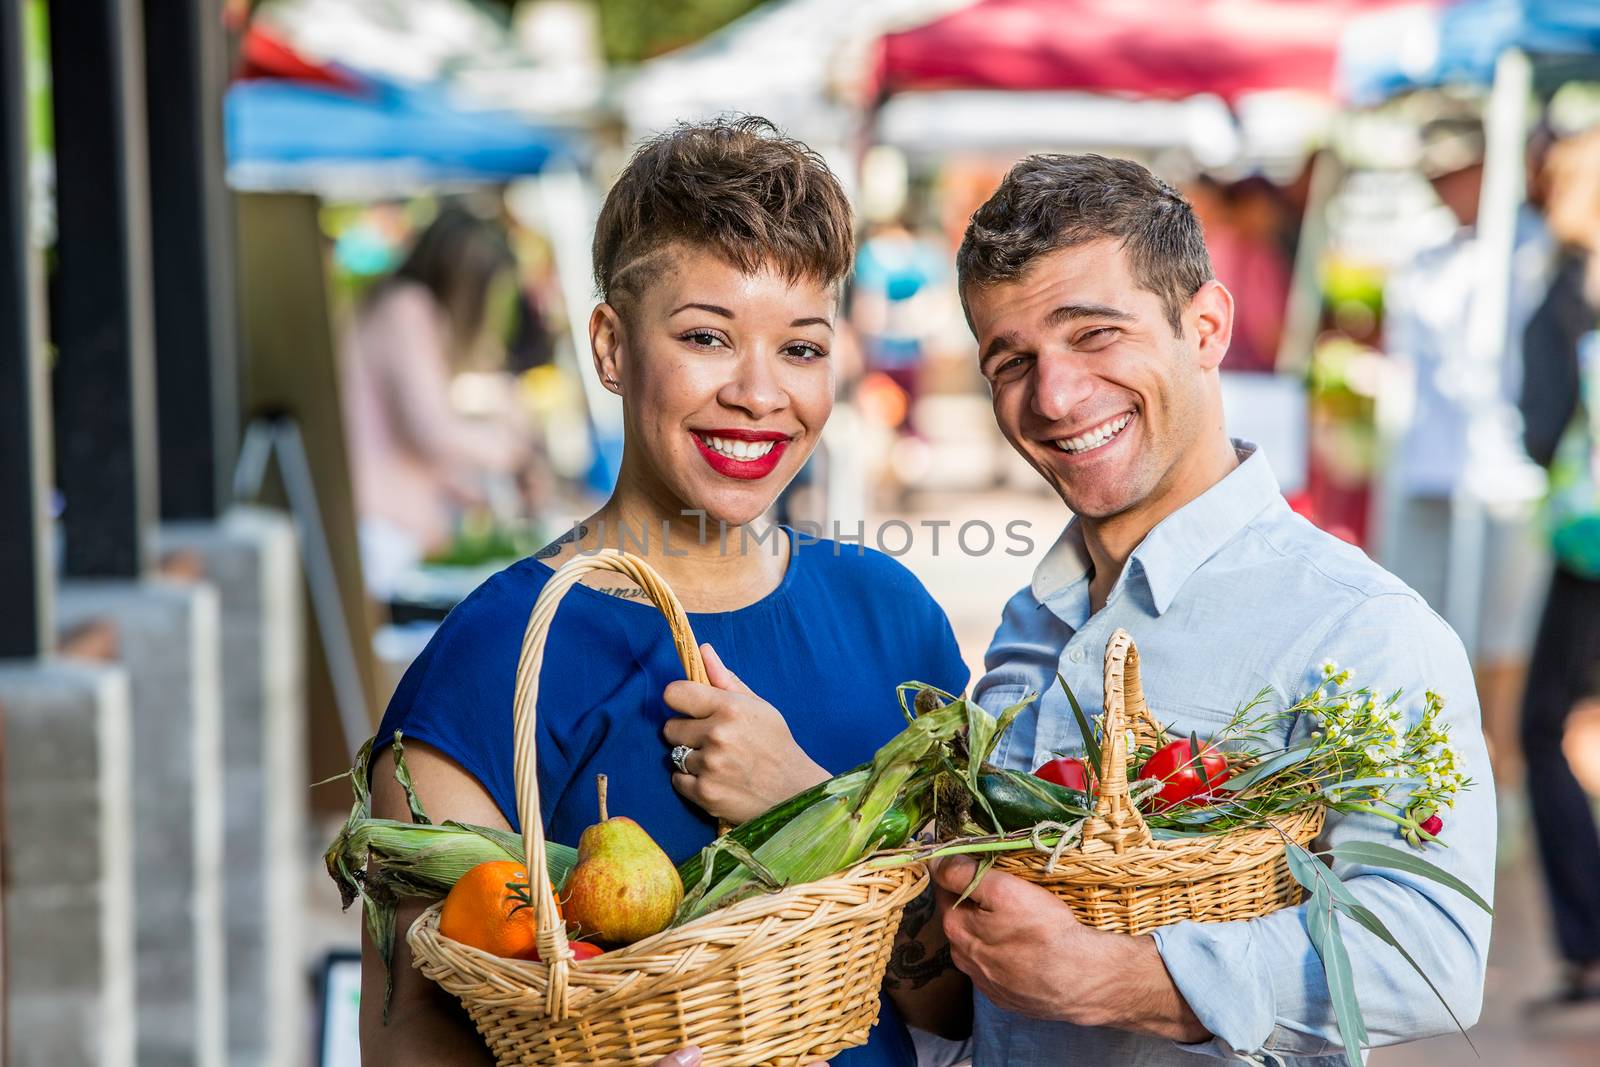 Smiling Couple at Farmers Market by Creatista